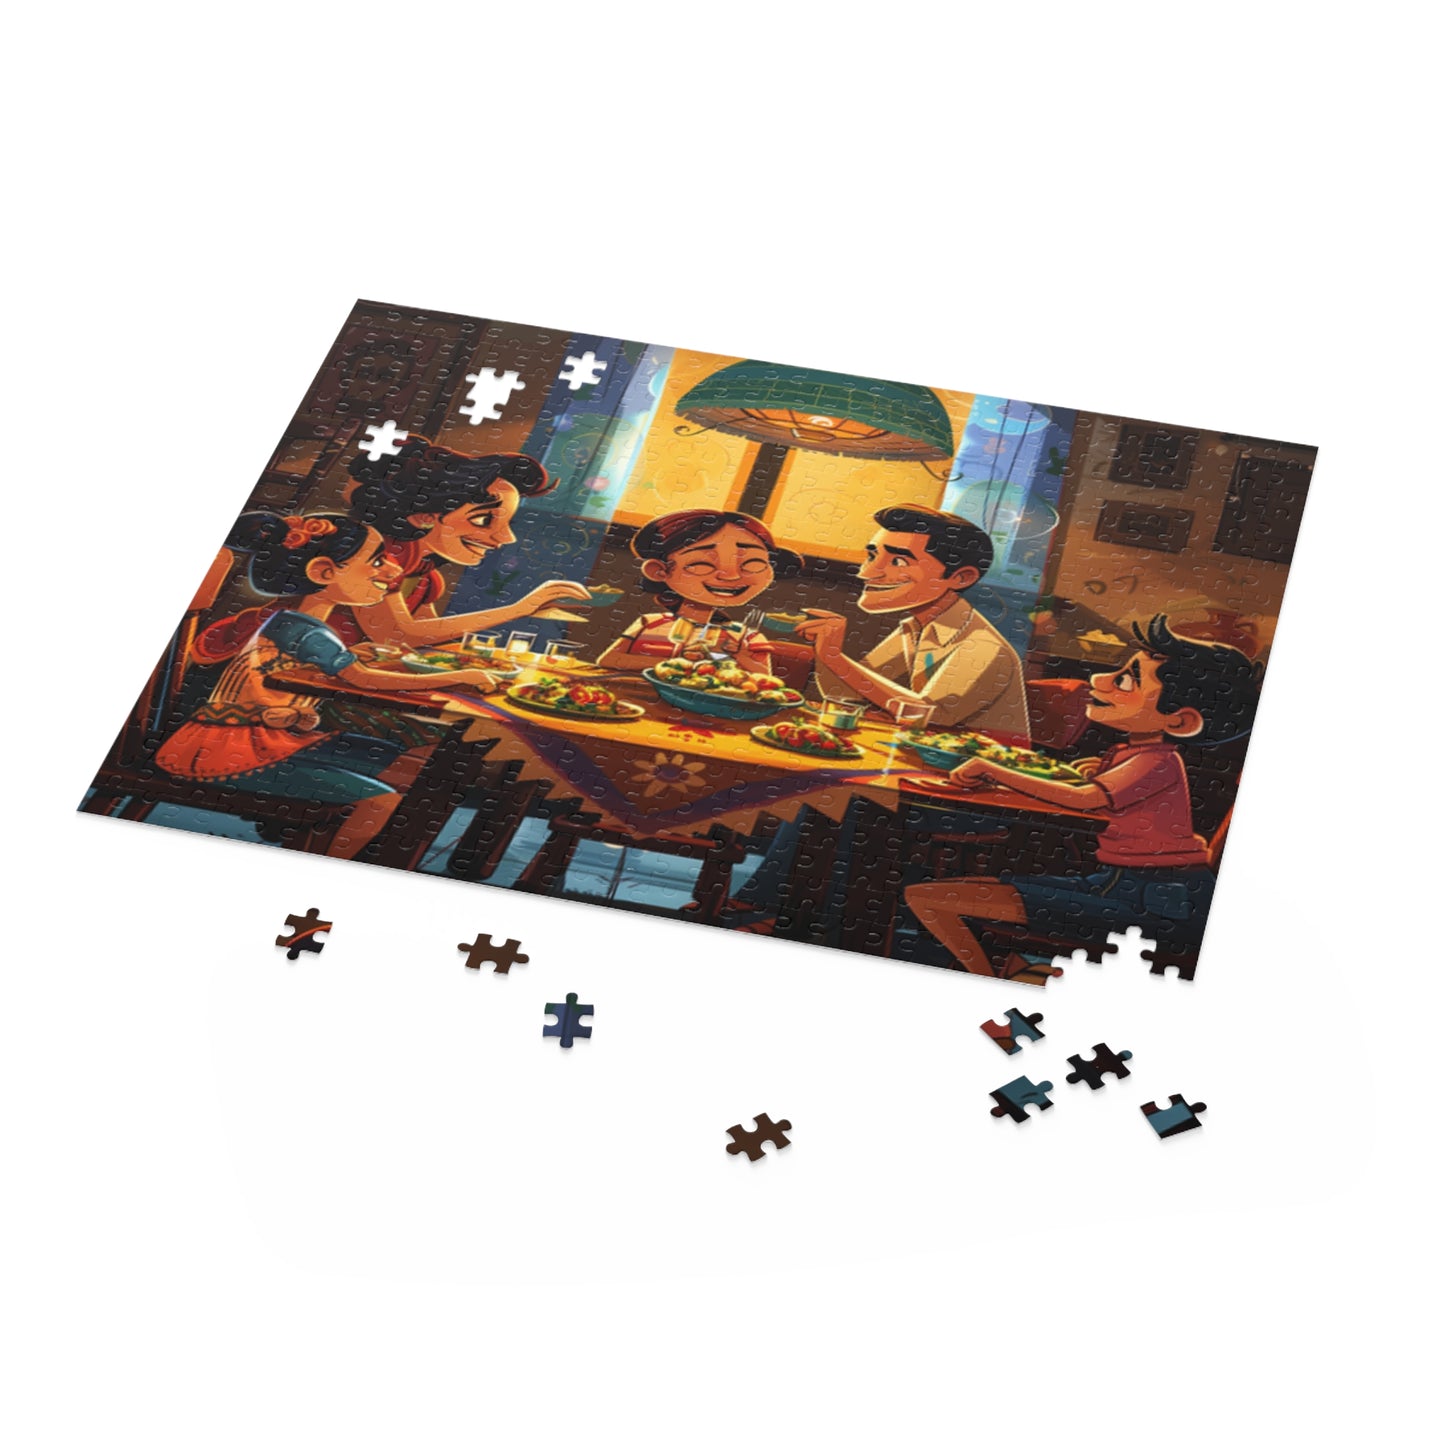 Mexican Art Happy Family Retro Jigsaw Puzzle Adult Birthday Business Jigsaw Puzzle Gift for Him Funny Humorous Indoor Outdoor Game Gift For Her Online-5